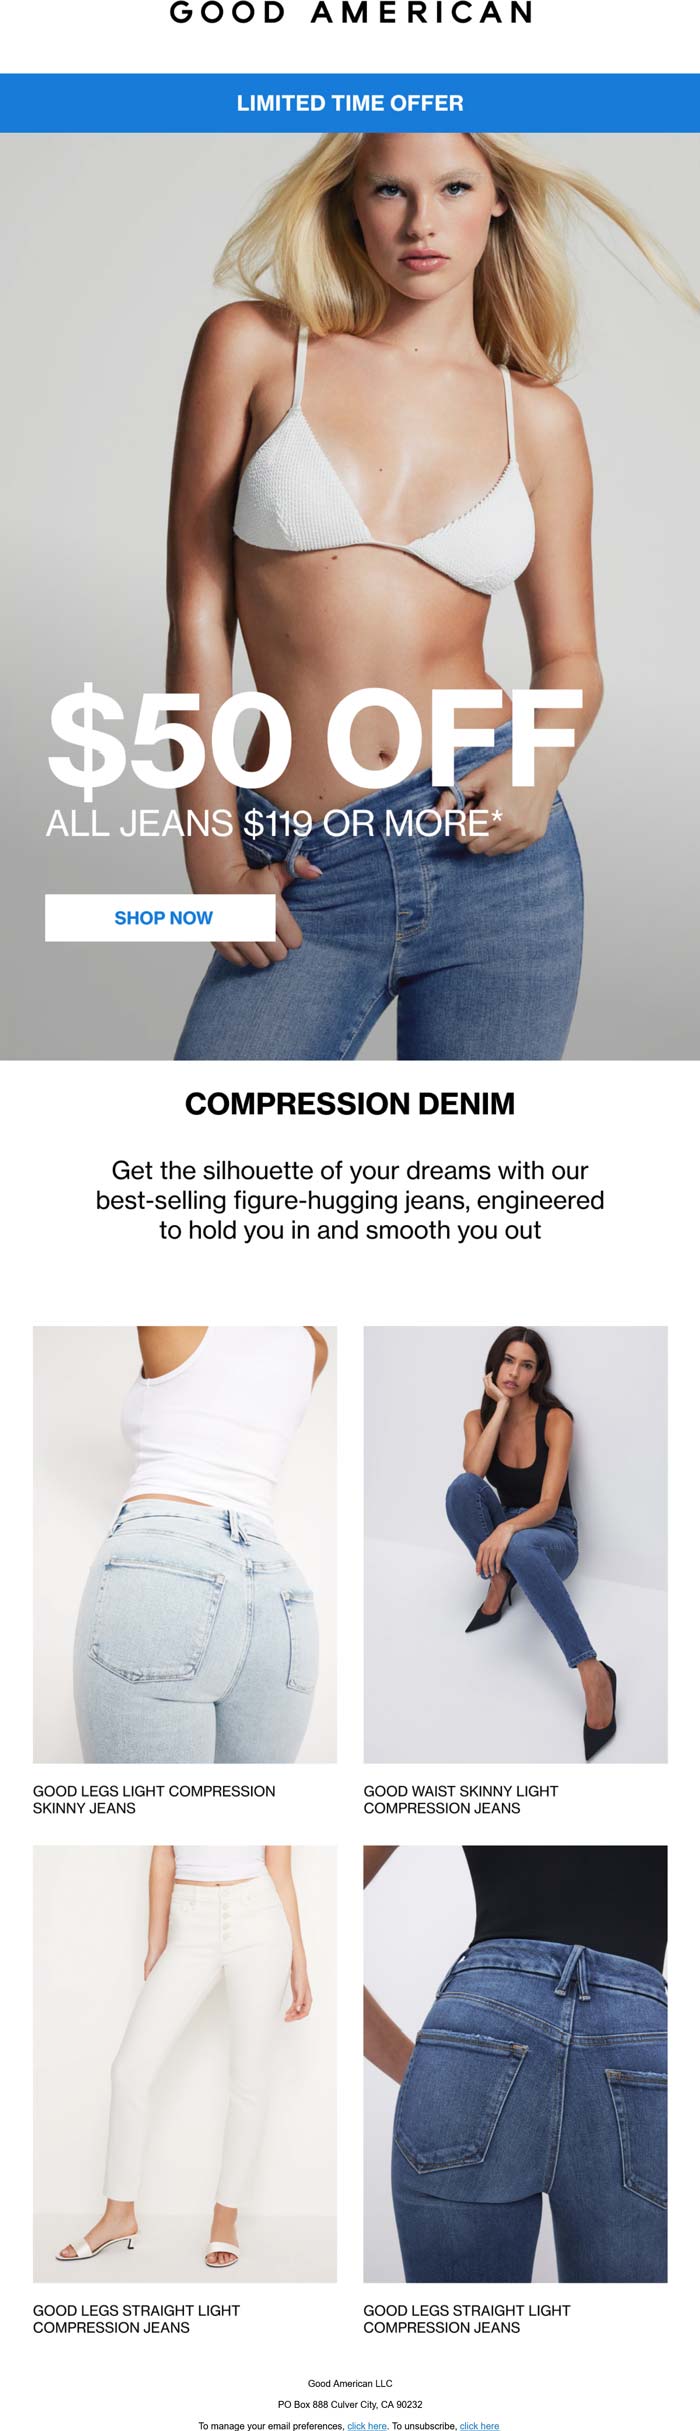 Good American stores Coupon  $50 off $119+ jeans at Good American #goodamerican 